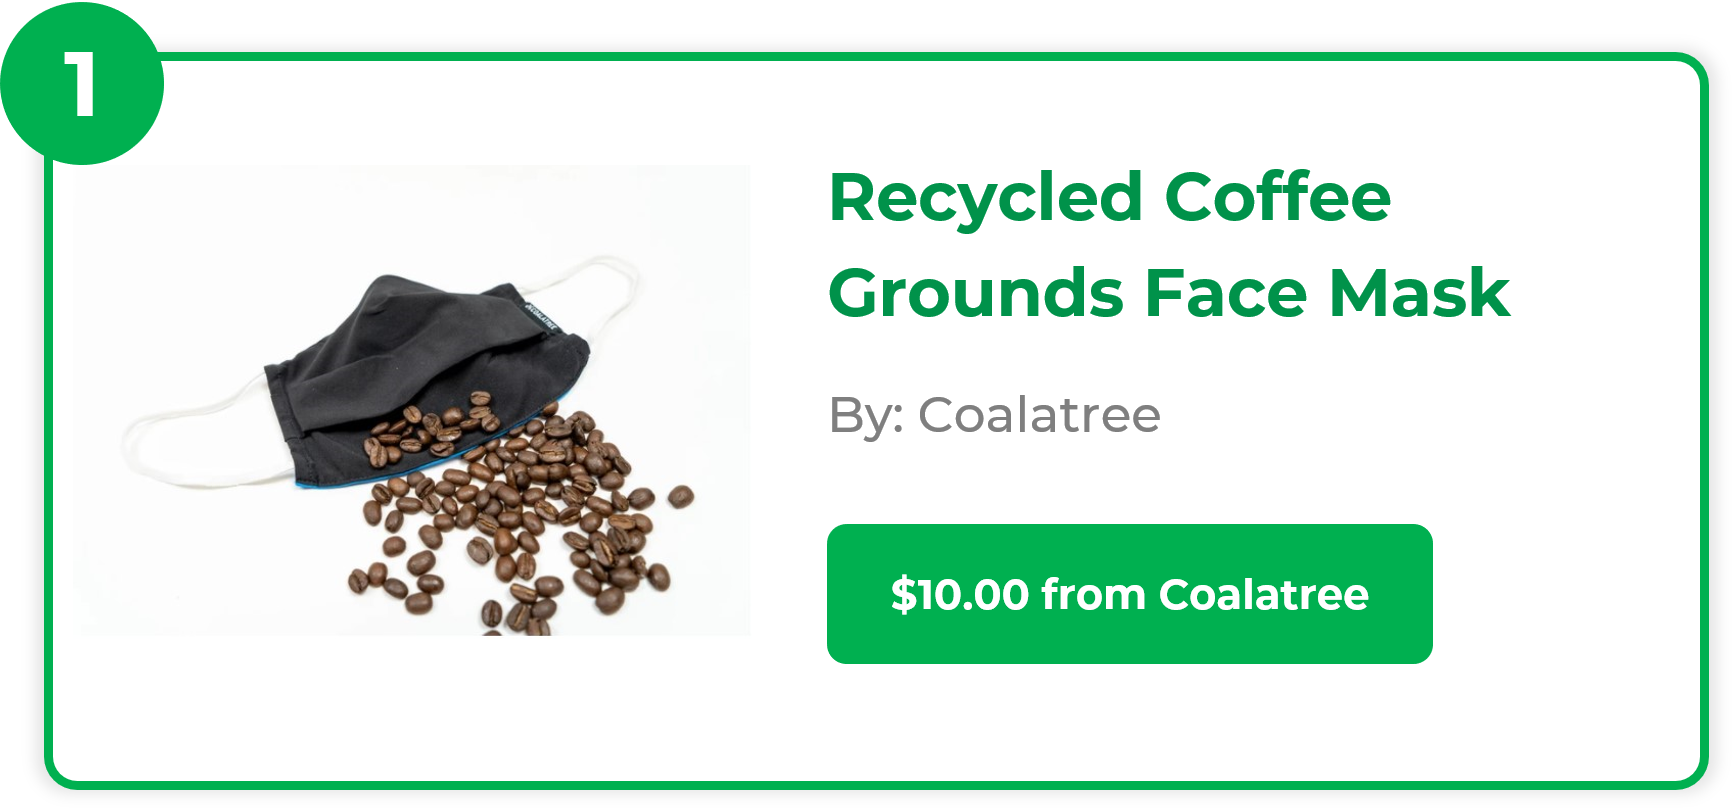 Recycled Coffee Grounds Face Mask - Coalatree